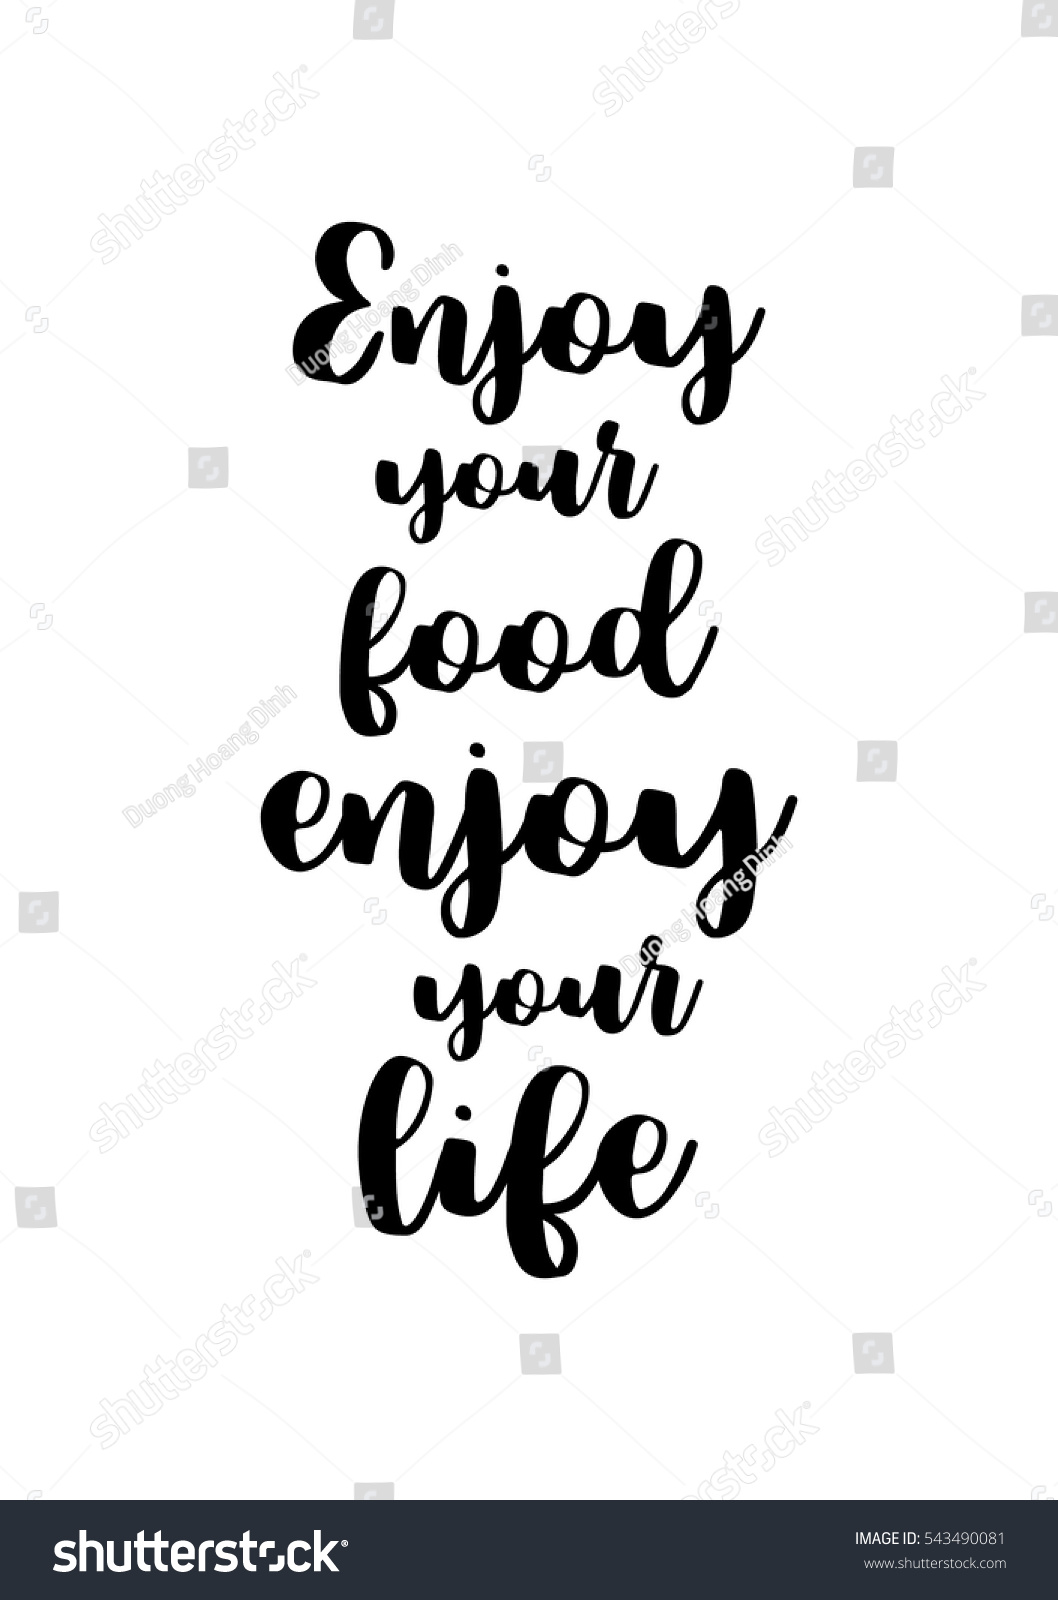 Quote Food calligraphy style Hand lettering design element Inspirational quote Enjoy your food